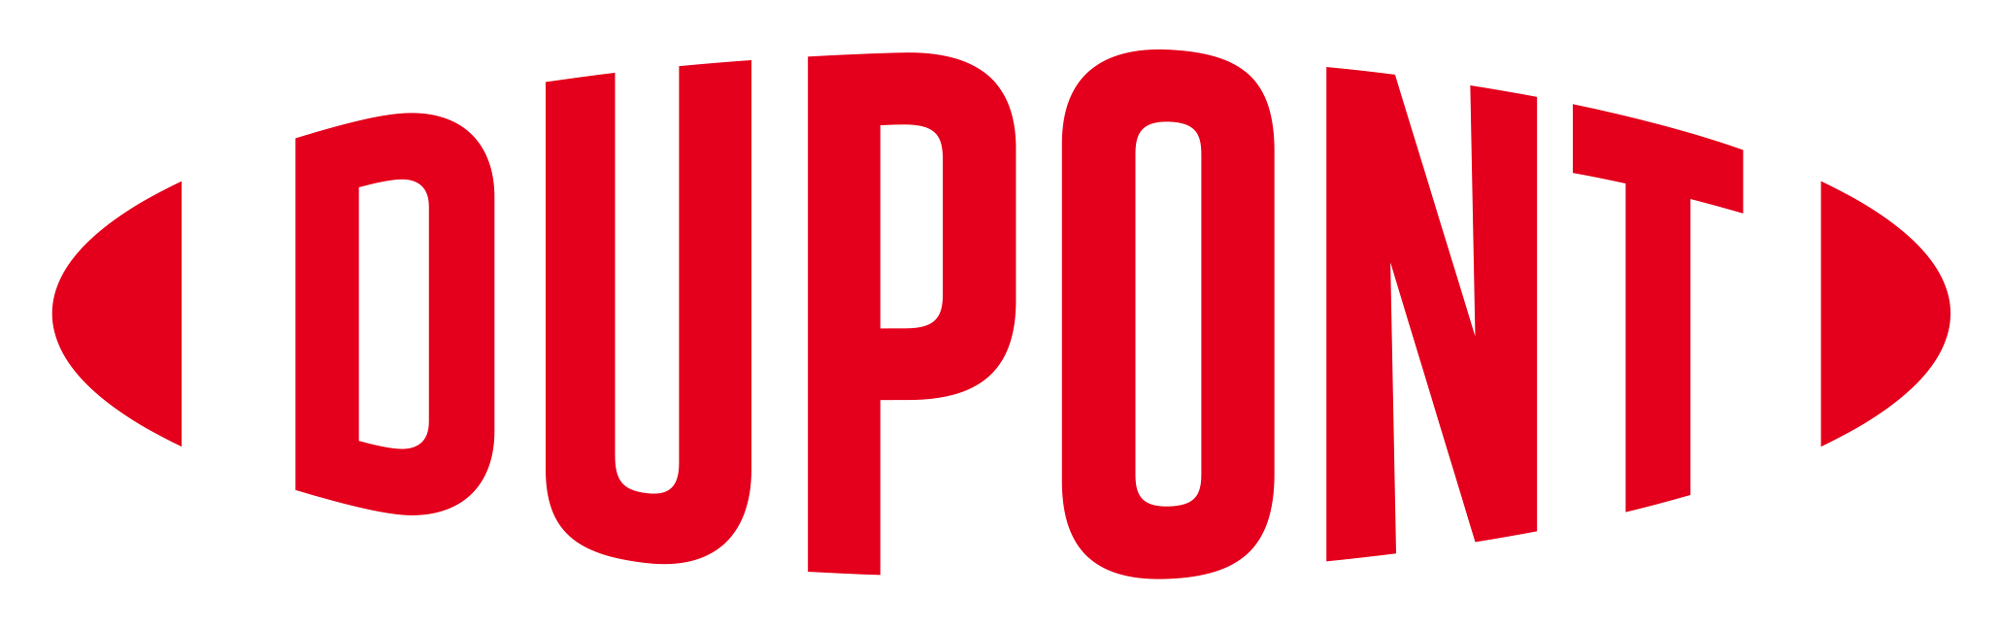 New Logo and Identity for DuPont by Lippincott